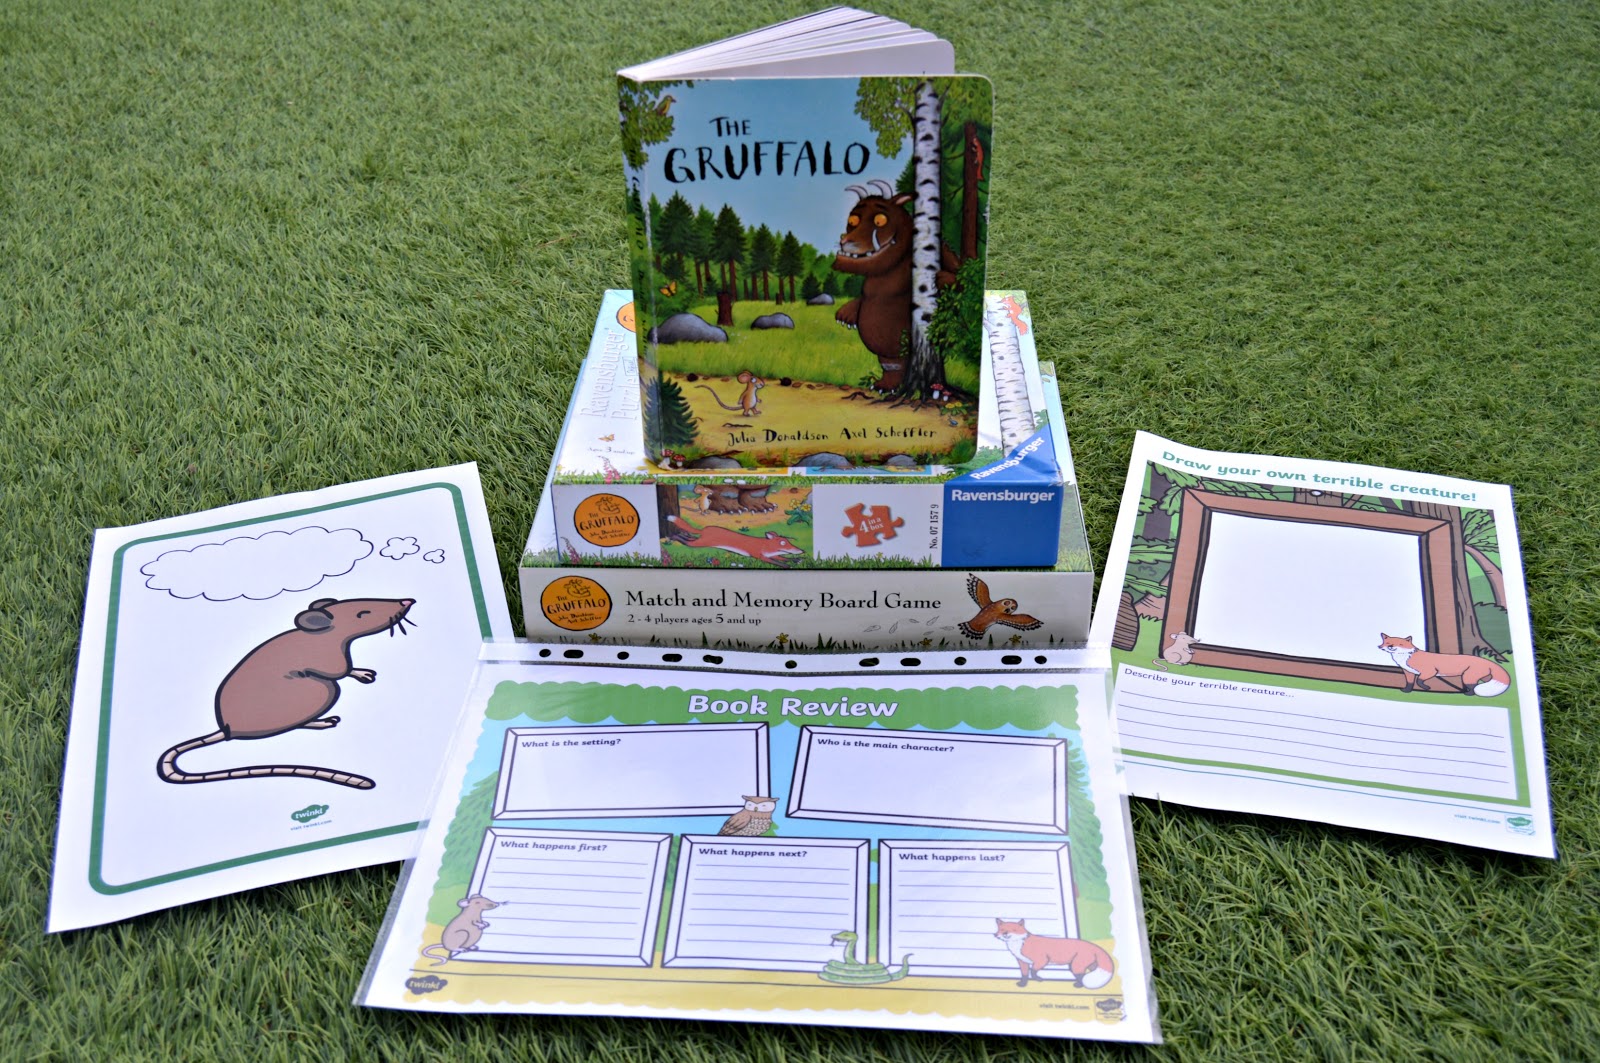 Gruffalo resources for home schooling